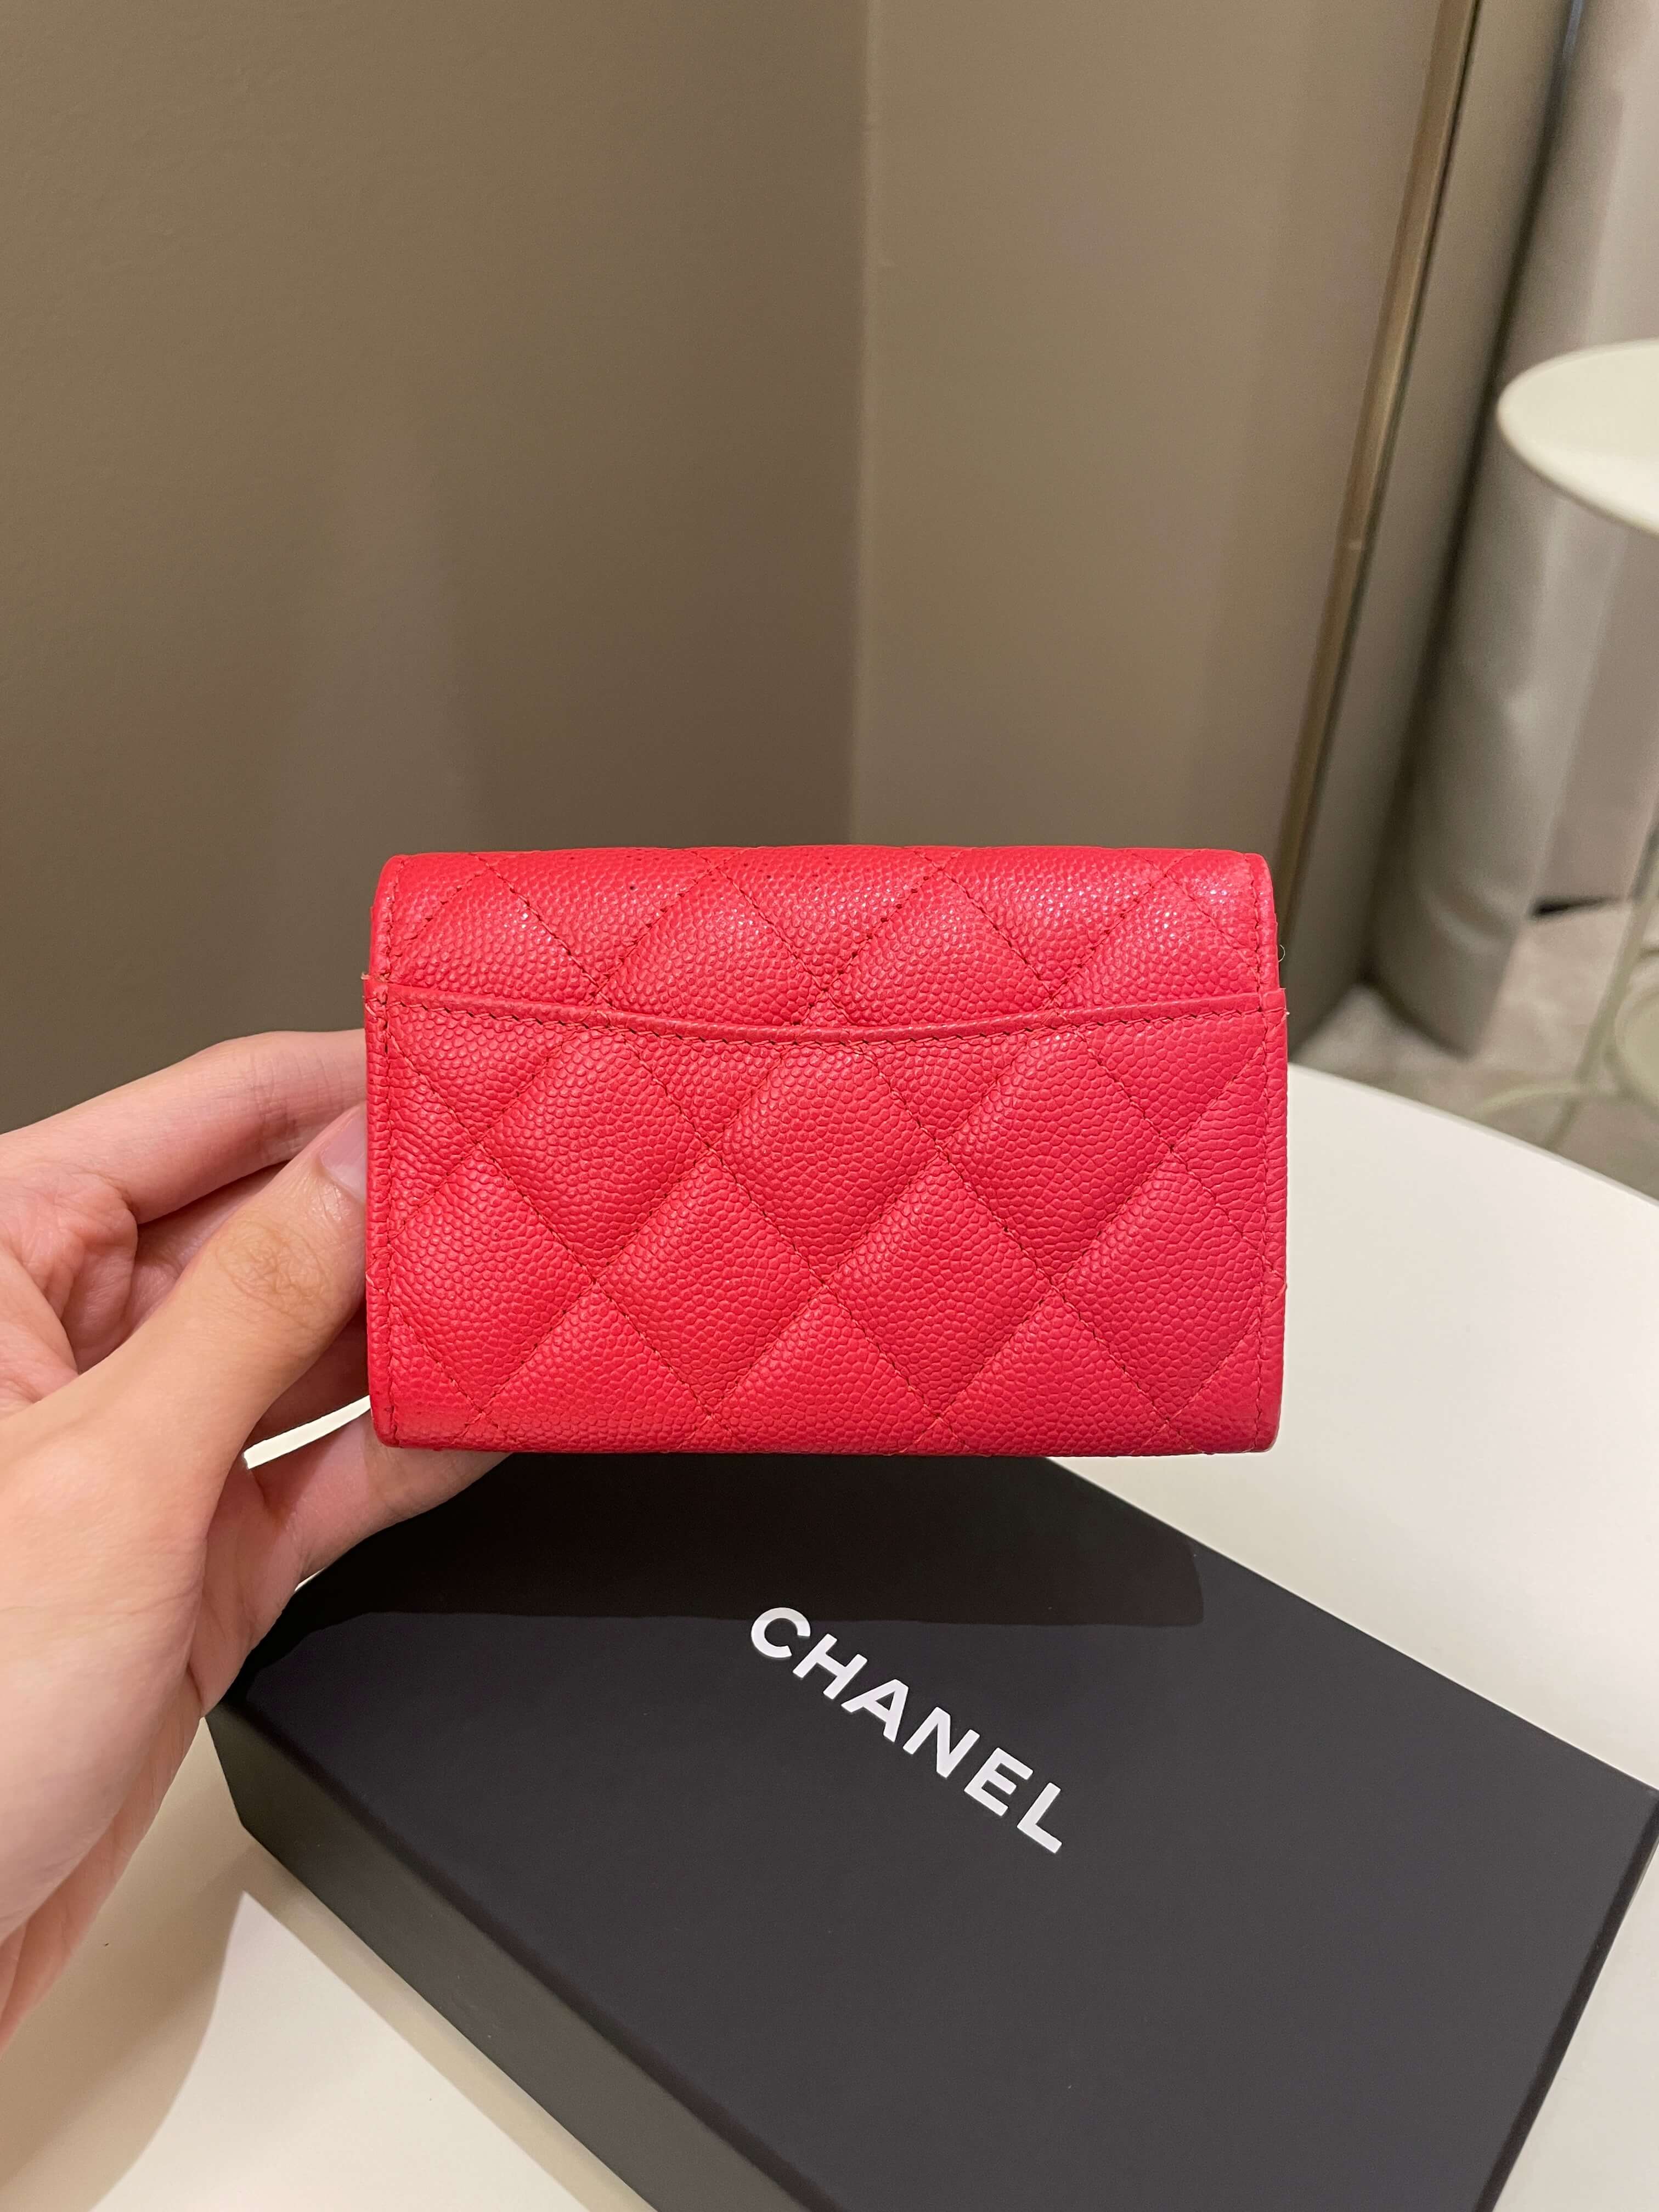 CHANEL, Bags, Chanel Classic Flap Card Holder